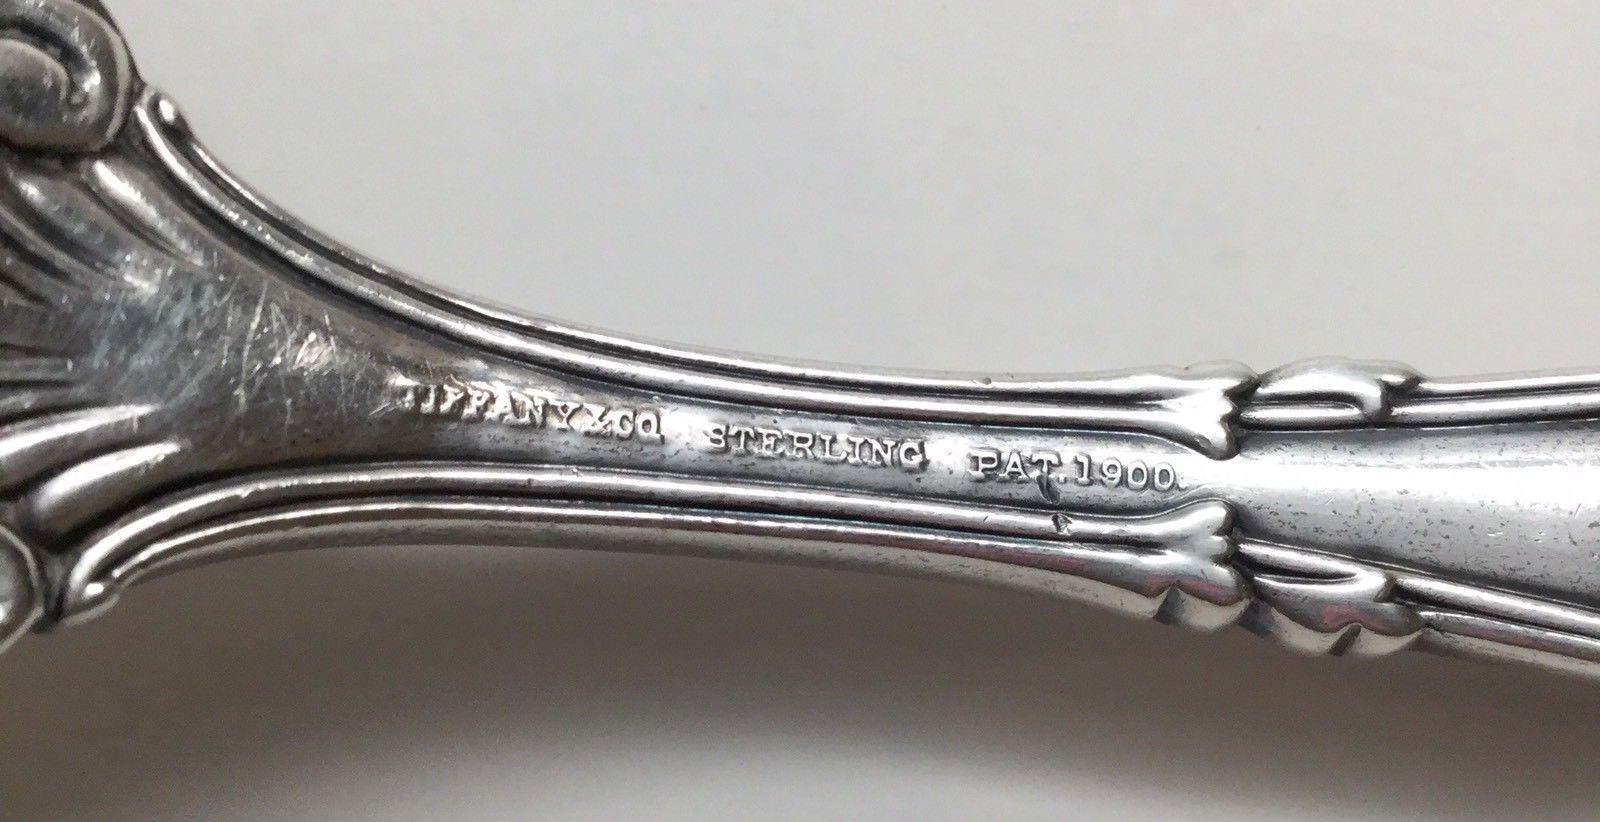 Tiffany & Co. Florentine 1900 Sterling Silver Crumber In Good Condition For Sale In Washington Depot, CT